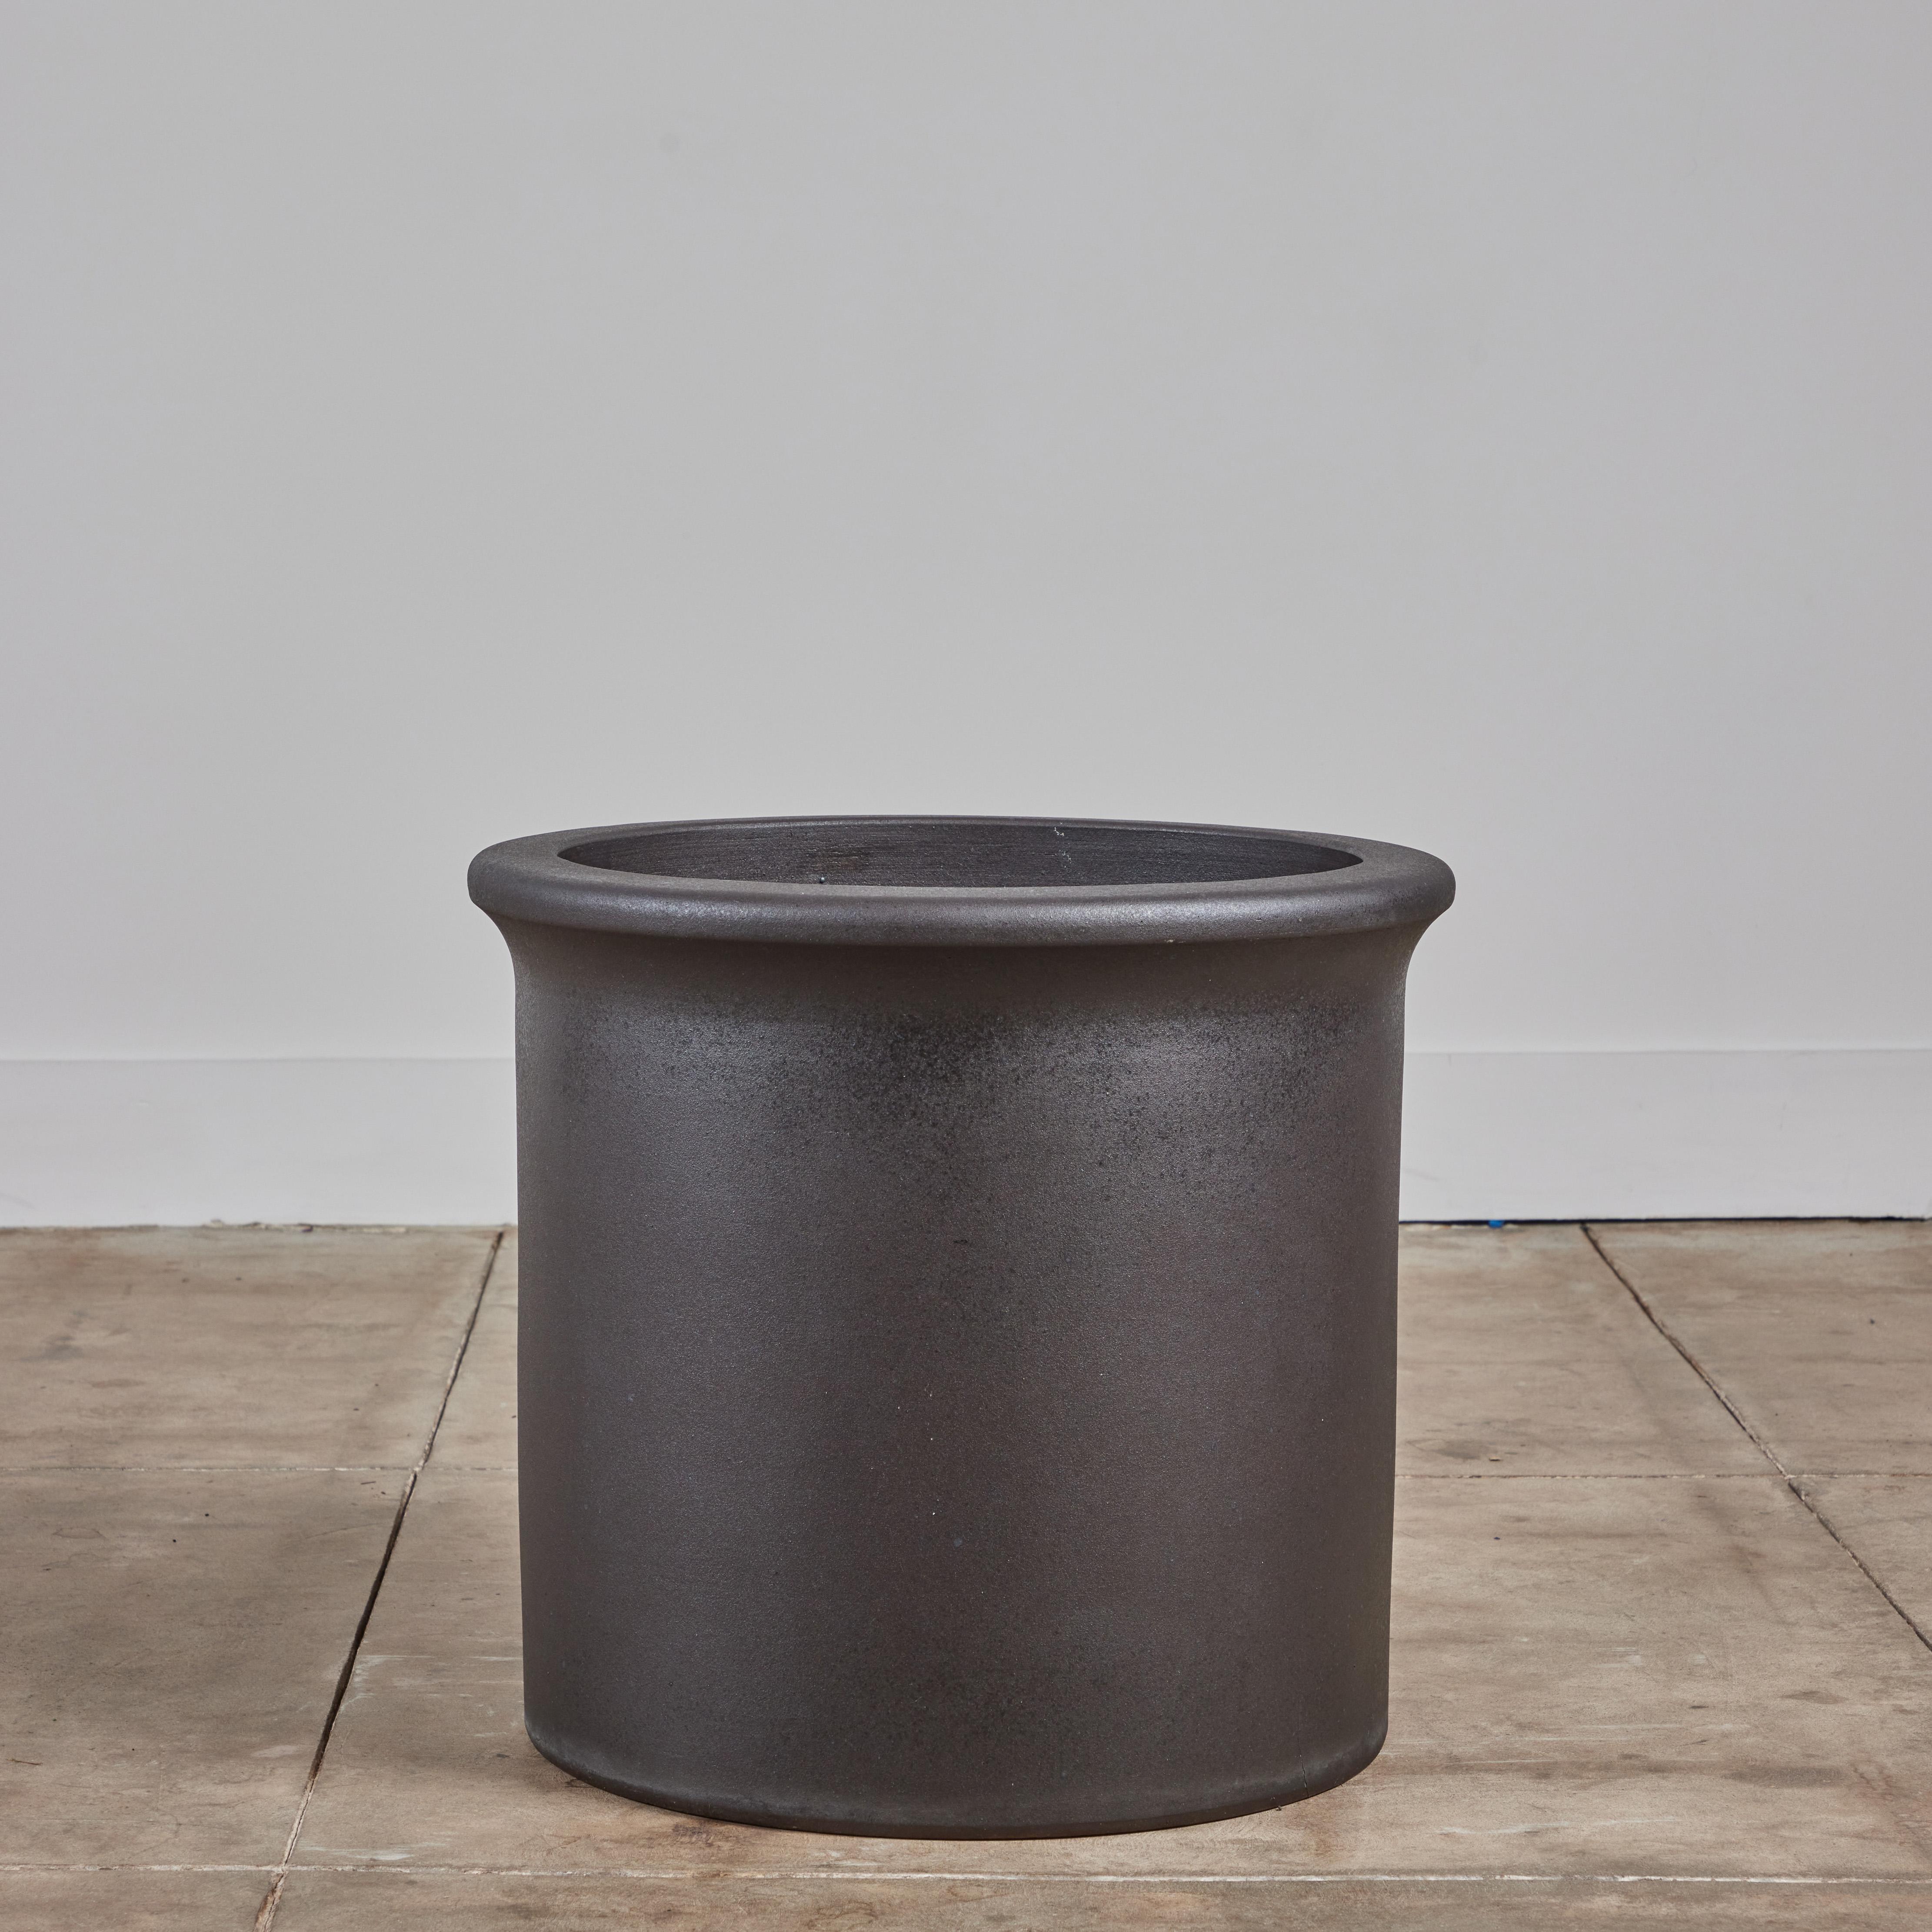 A beautiful black glaze tulip planter by Architectural Pottery. This AP-3206 planter has a drum shape with a rounded lip that curves in at the top of the piece. Architectural Pottery containers can be planted in directly or used as a decorative